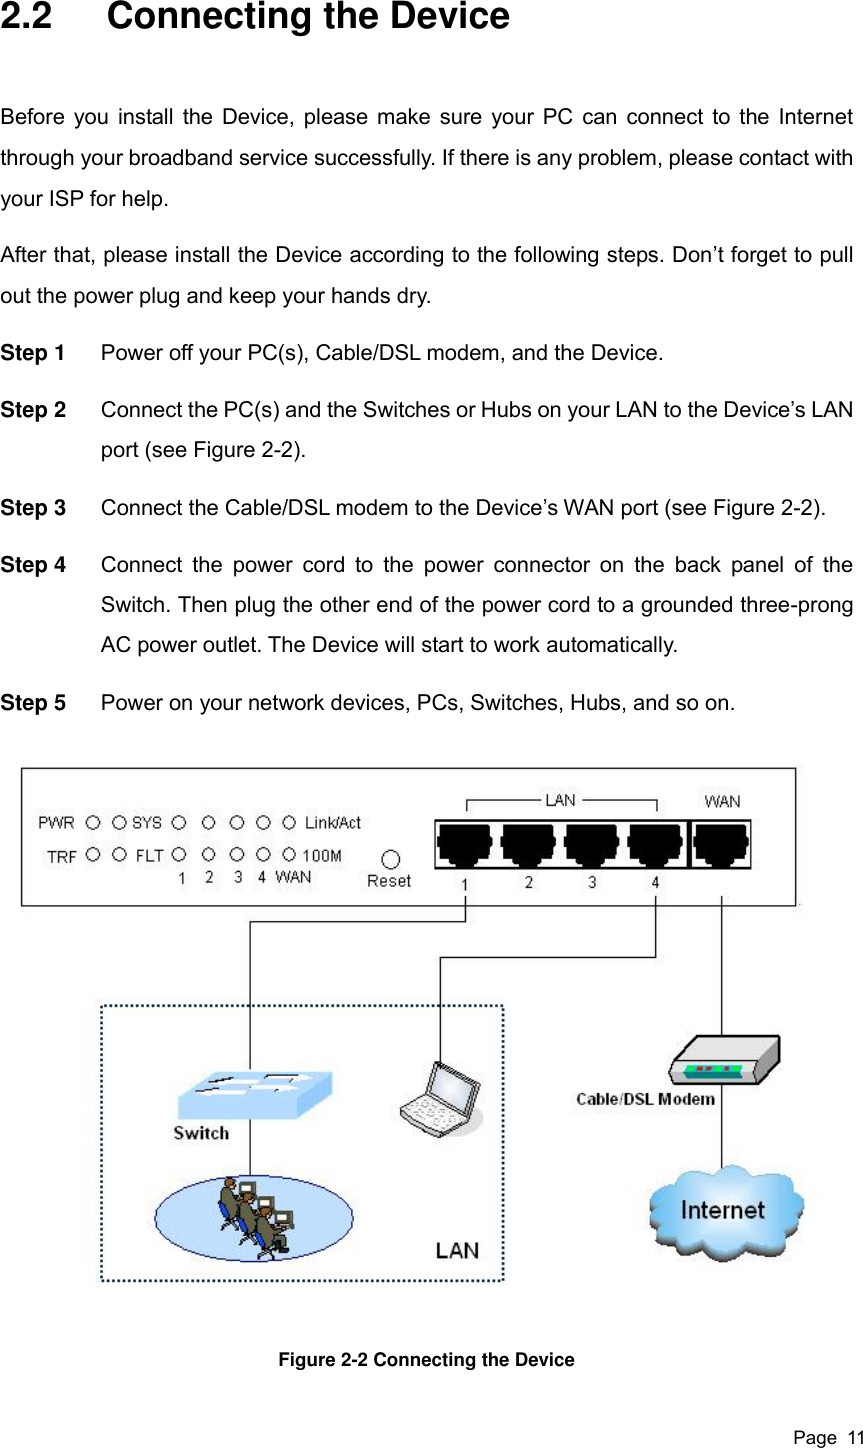  Page  11 2.2  Connecting the Device Before you install the Device, please make sure your PC can connect to the Internet through your broadband service successfully. If there is any problem, please contact with your ISP for help. After that, please install the Device according to the following steps. Don’t forget to pull out the power plug and keep your hands dry. Step 1  Power off your PC(s), Cable/DSL modem, and the Device. Step 2  Connect the PC(s) and the Switches or Hubs on your LAN to the Device’s LAN port (see Figure 2-2). Step 3  Connect the Cable/DSL modem to the Device’s WAN port (see Figure 2-2). Step 4  Connect the  power  cord to  the  power  connector  on  the  back  panel  of  the Switch. Then plug the other end of the power cord to a grounded three-prong AC power outlet. The Device will start to work automatically. Step 5  Power on your network devices, PCs, Switches, Hubs, and so on.  Figure 2-2 Connecting the Device 